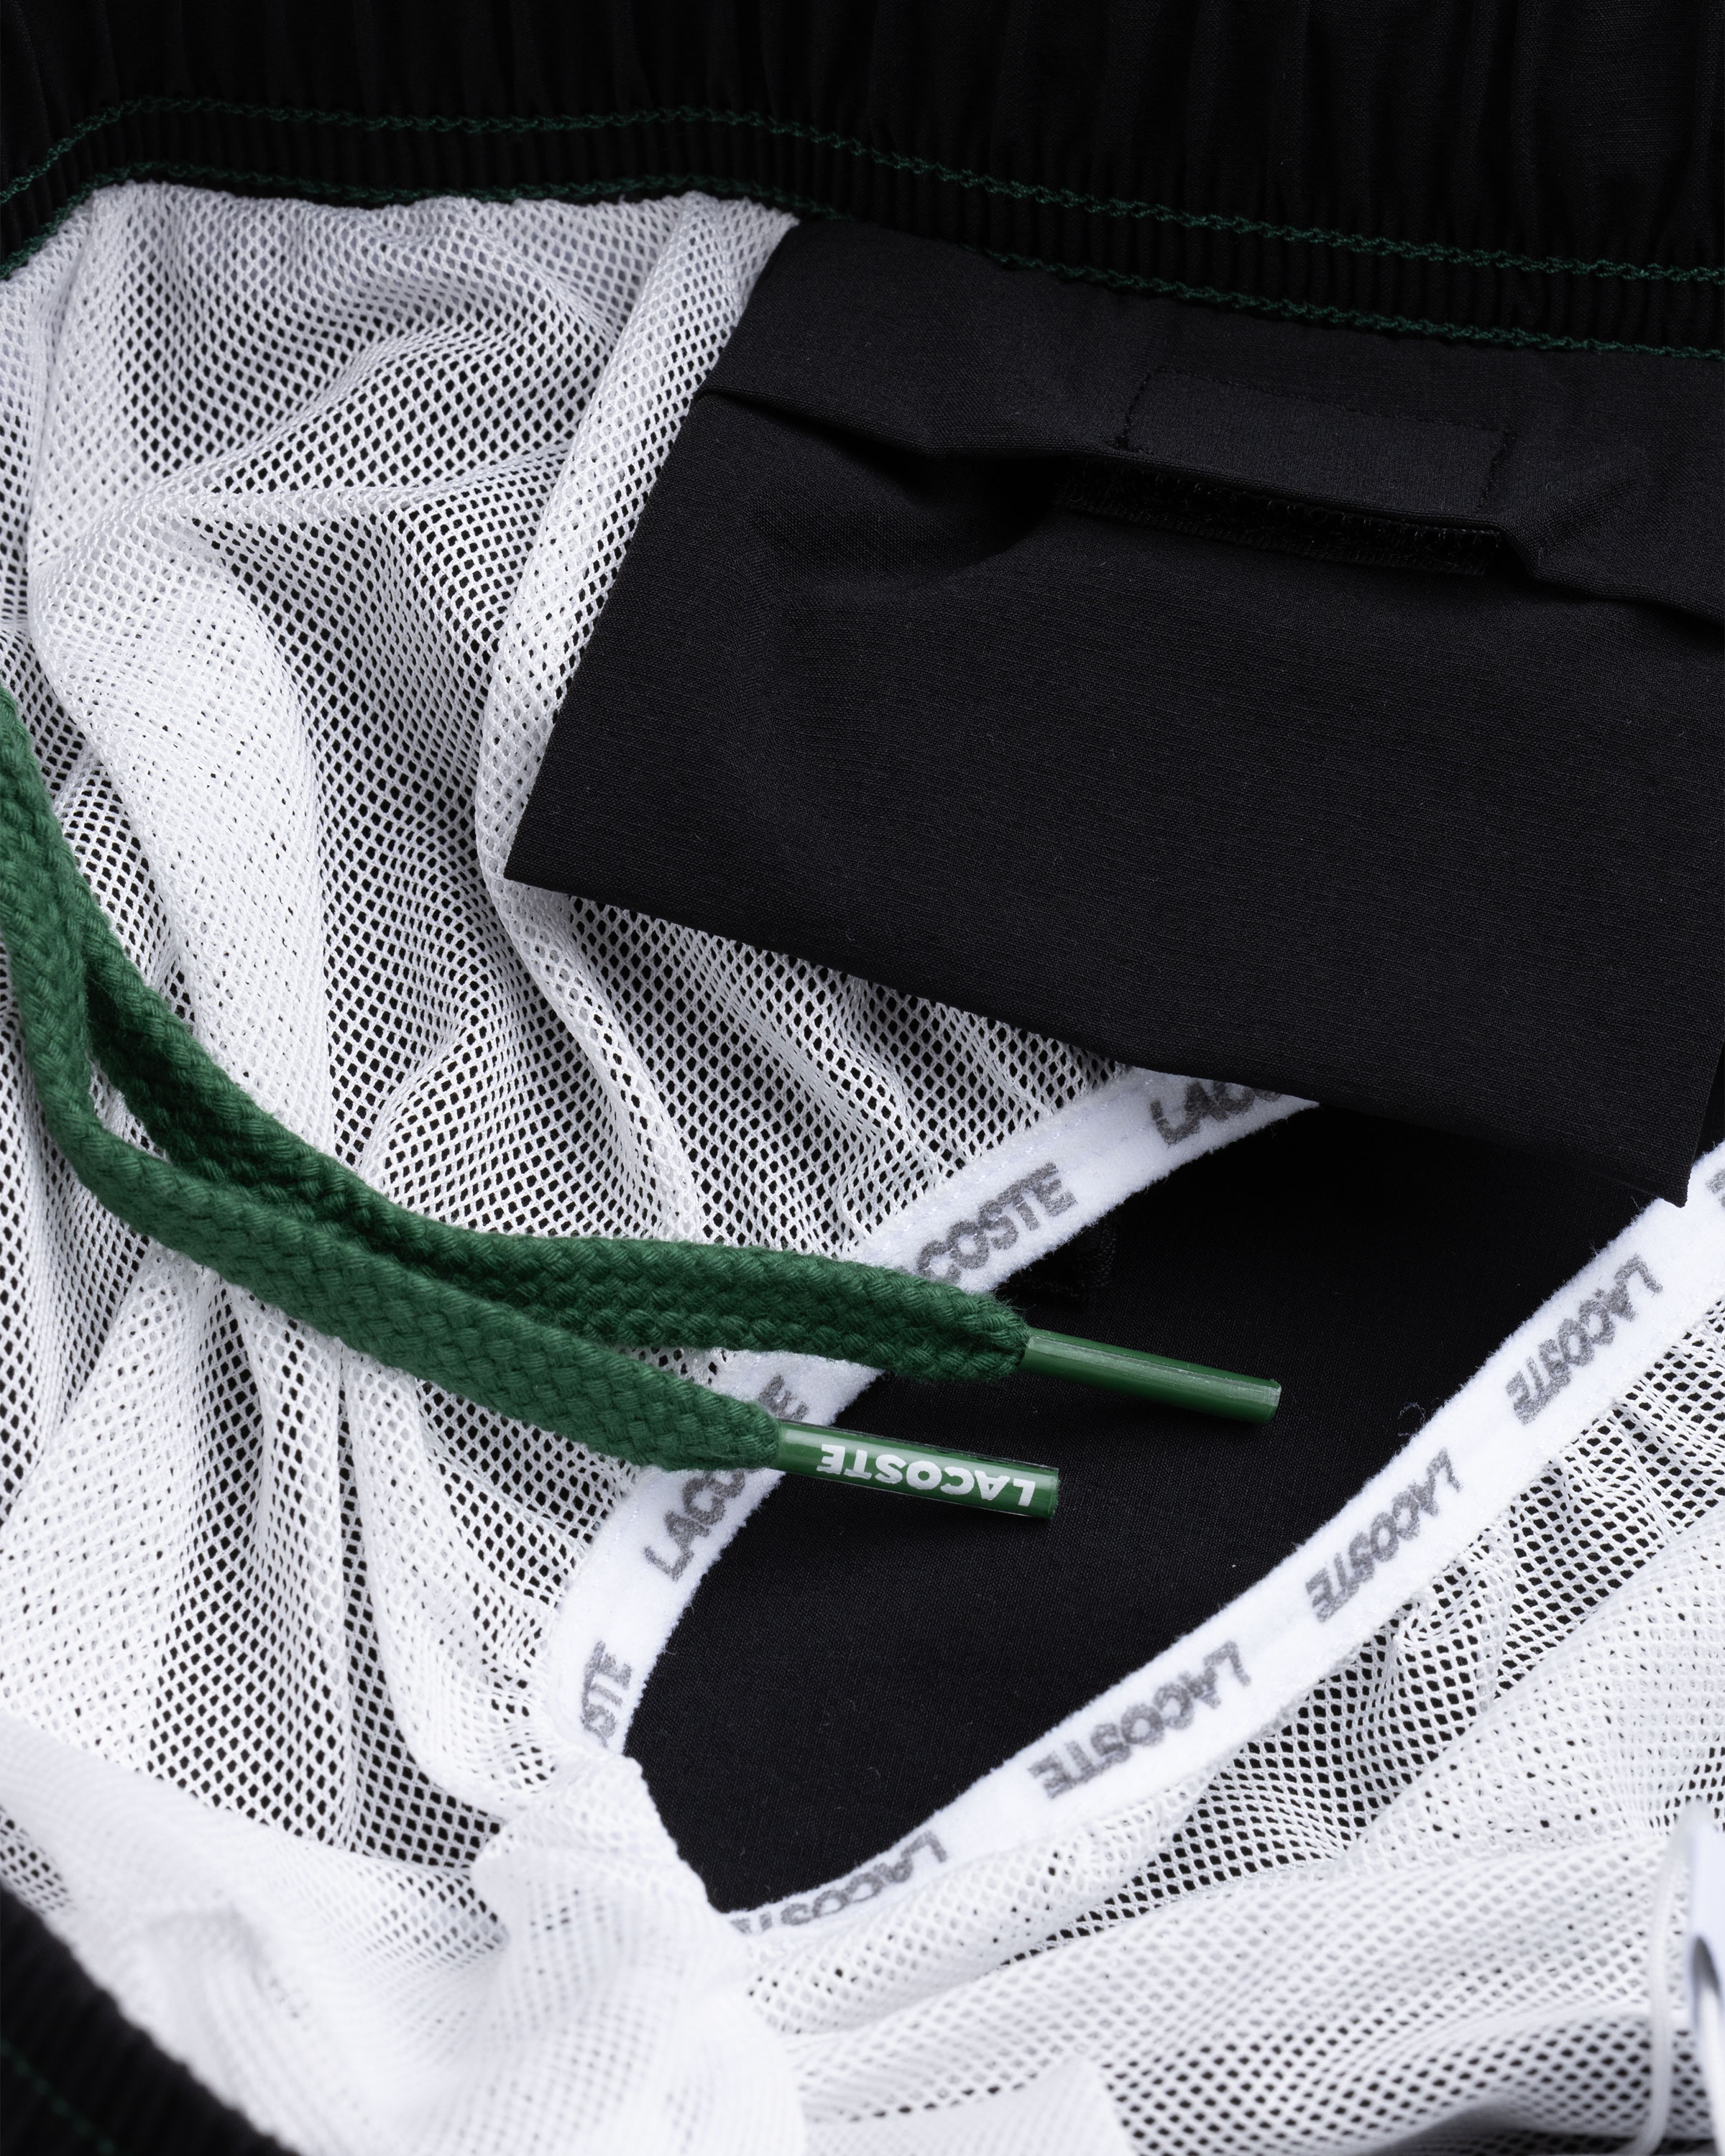 Lacoste x Highsnobiety – Not In Paris Tennis Shorts Black - Active Shorts - Sinople - Image 8